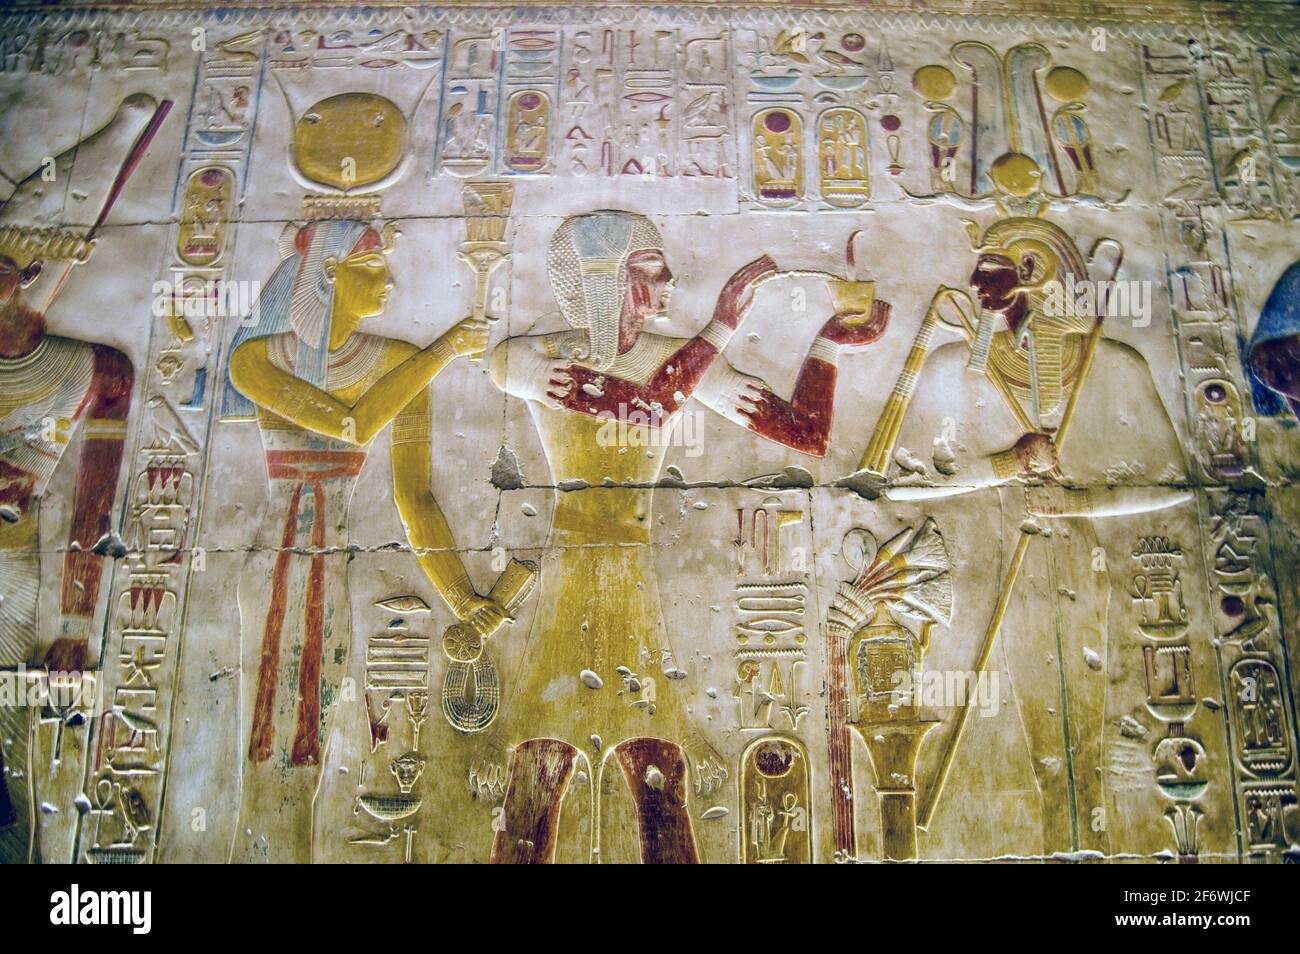 Ancient Egyptian hieroglyphic carving on an interior wall of the Temple of Abydos.  Showing the goddess Hathor on the left hand side, the god Osiris o Stock Photo